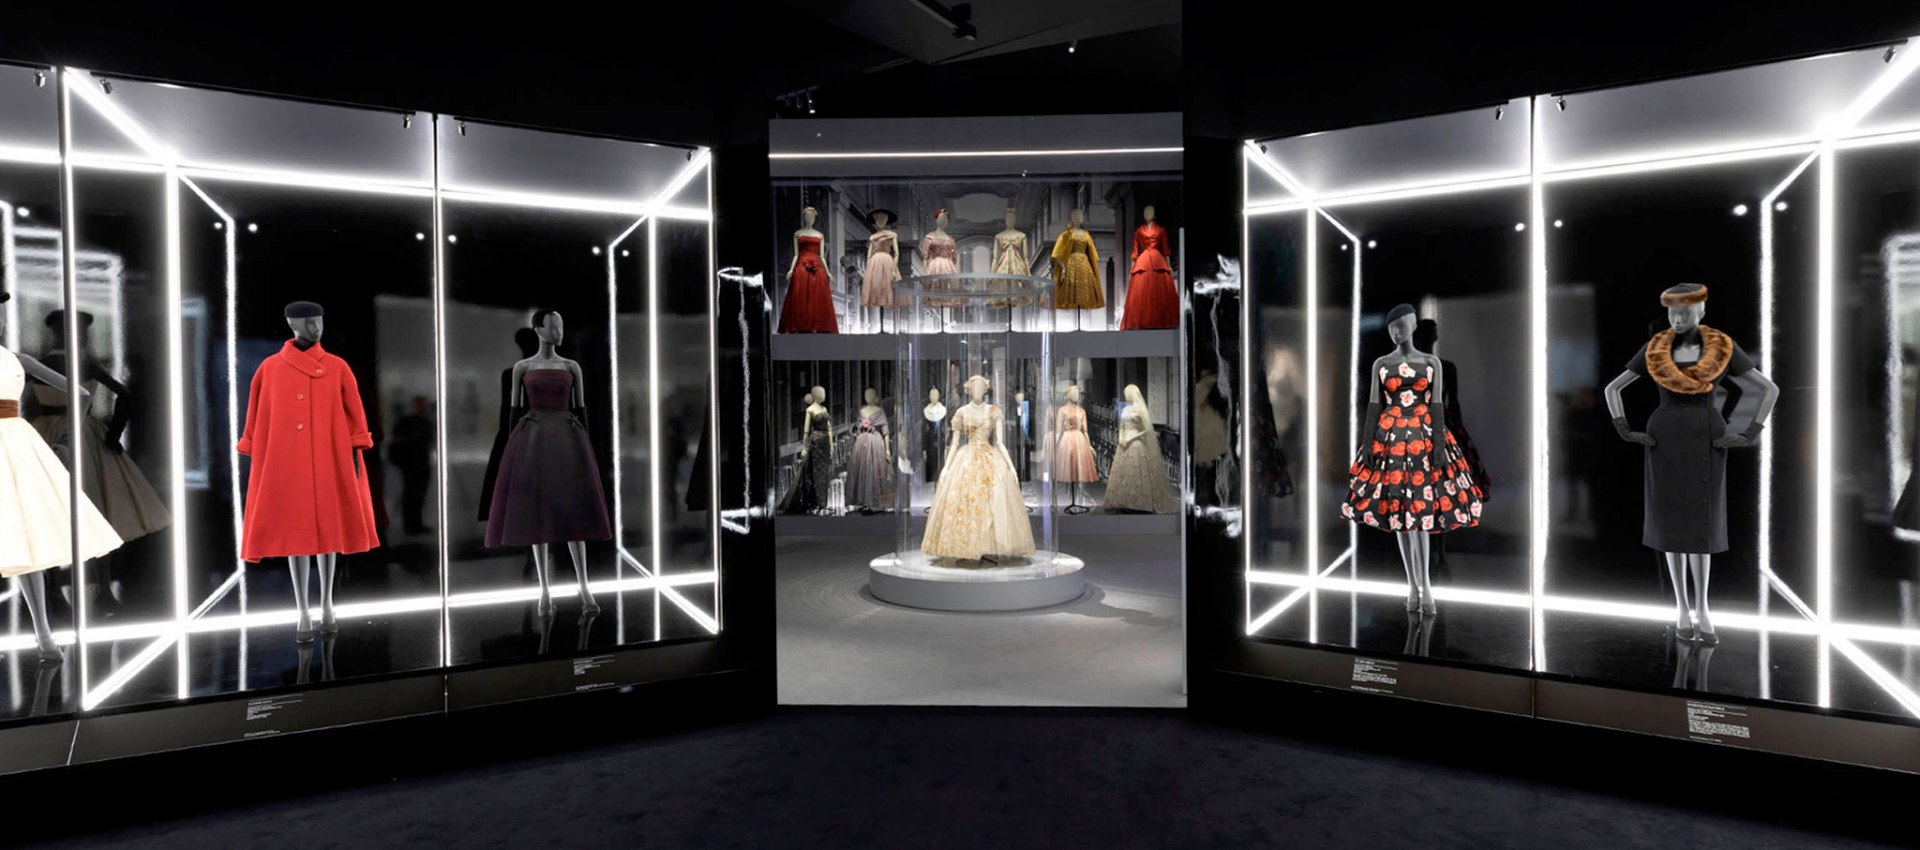 Inside Glorious "Christian Dior: Designer of Dreams" exhibition at V&A | The Strength of Architecture | From 1998